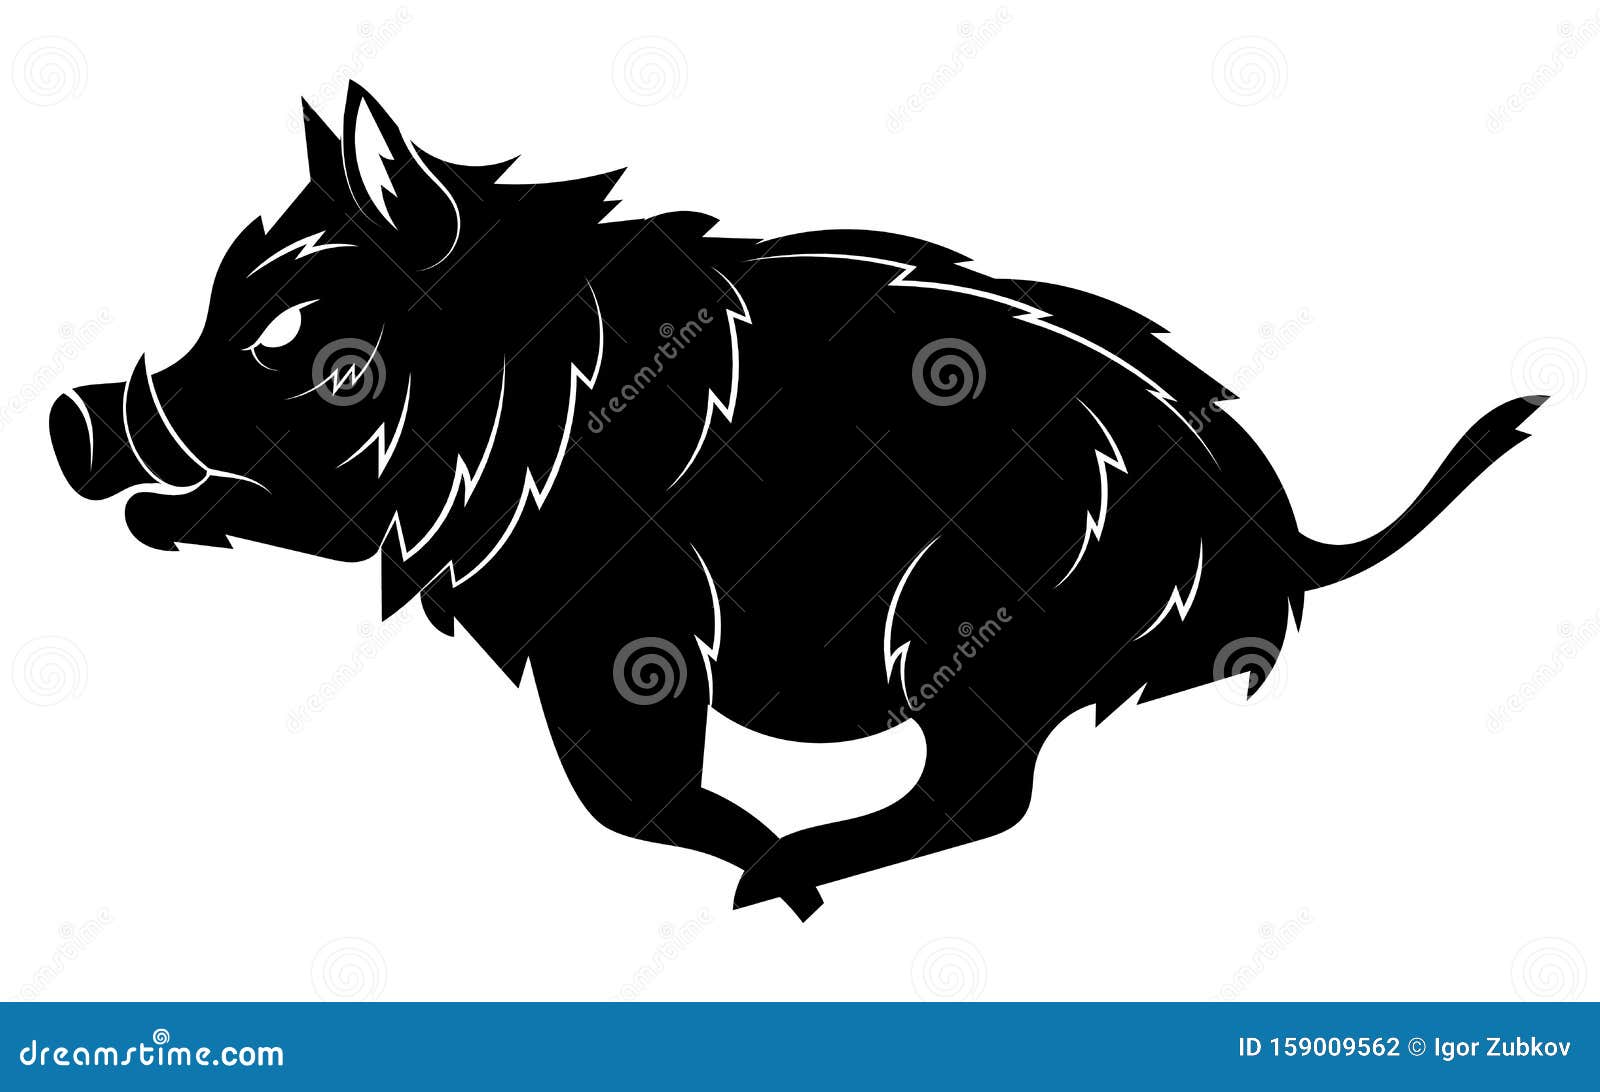 876 Warthog Tattoo Images Stock Photos  Vectors  Shutterstock